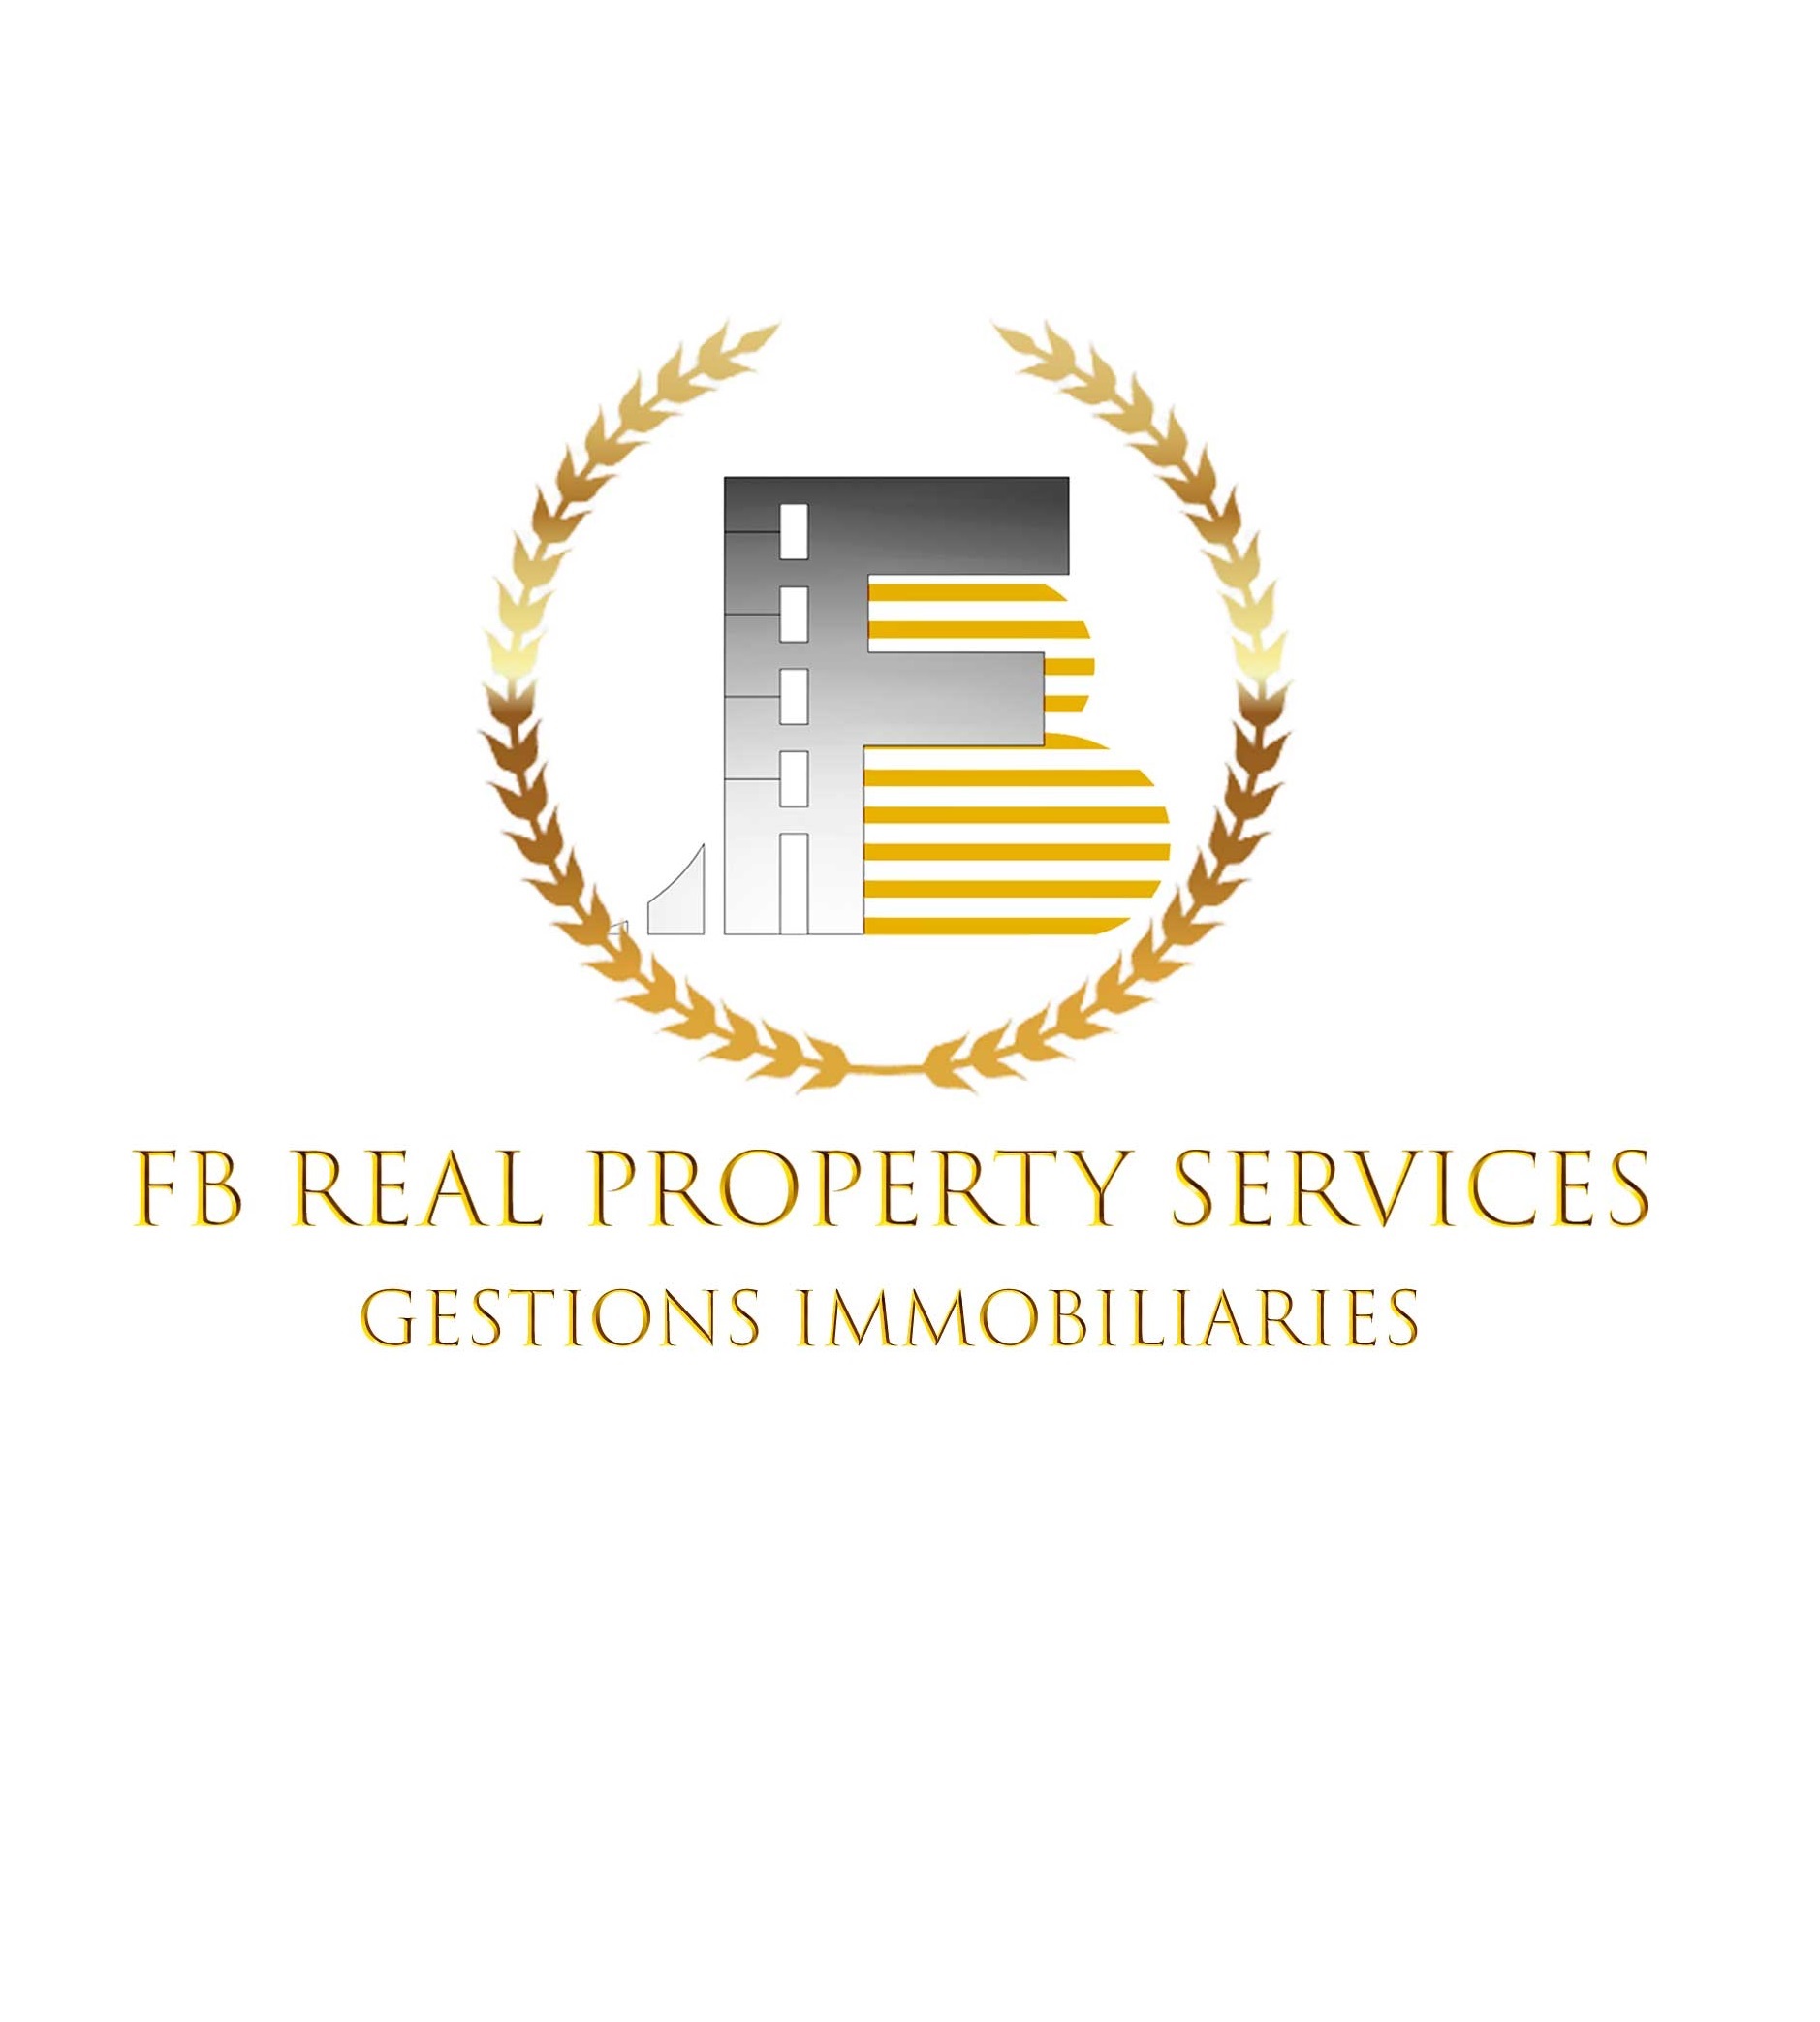 FB REAL PROPERTY SERVICES